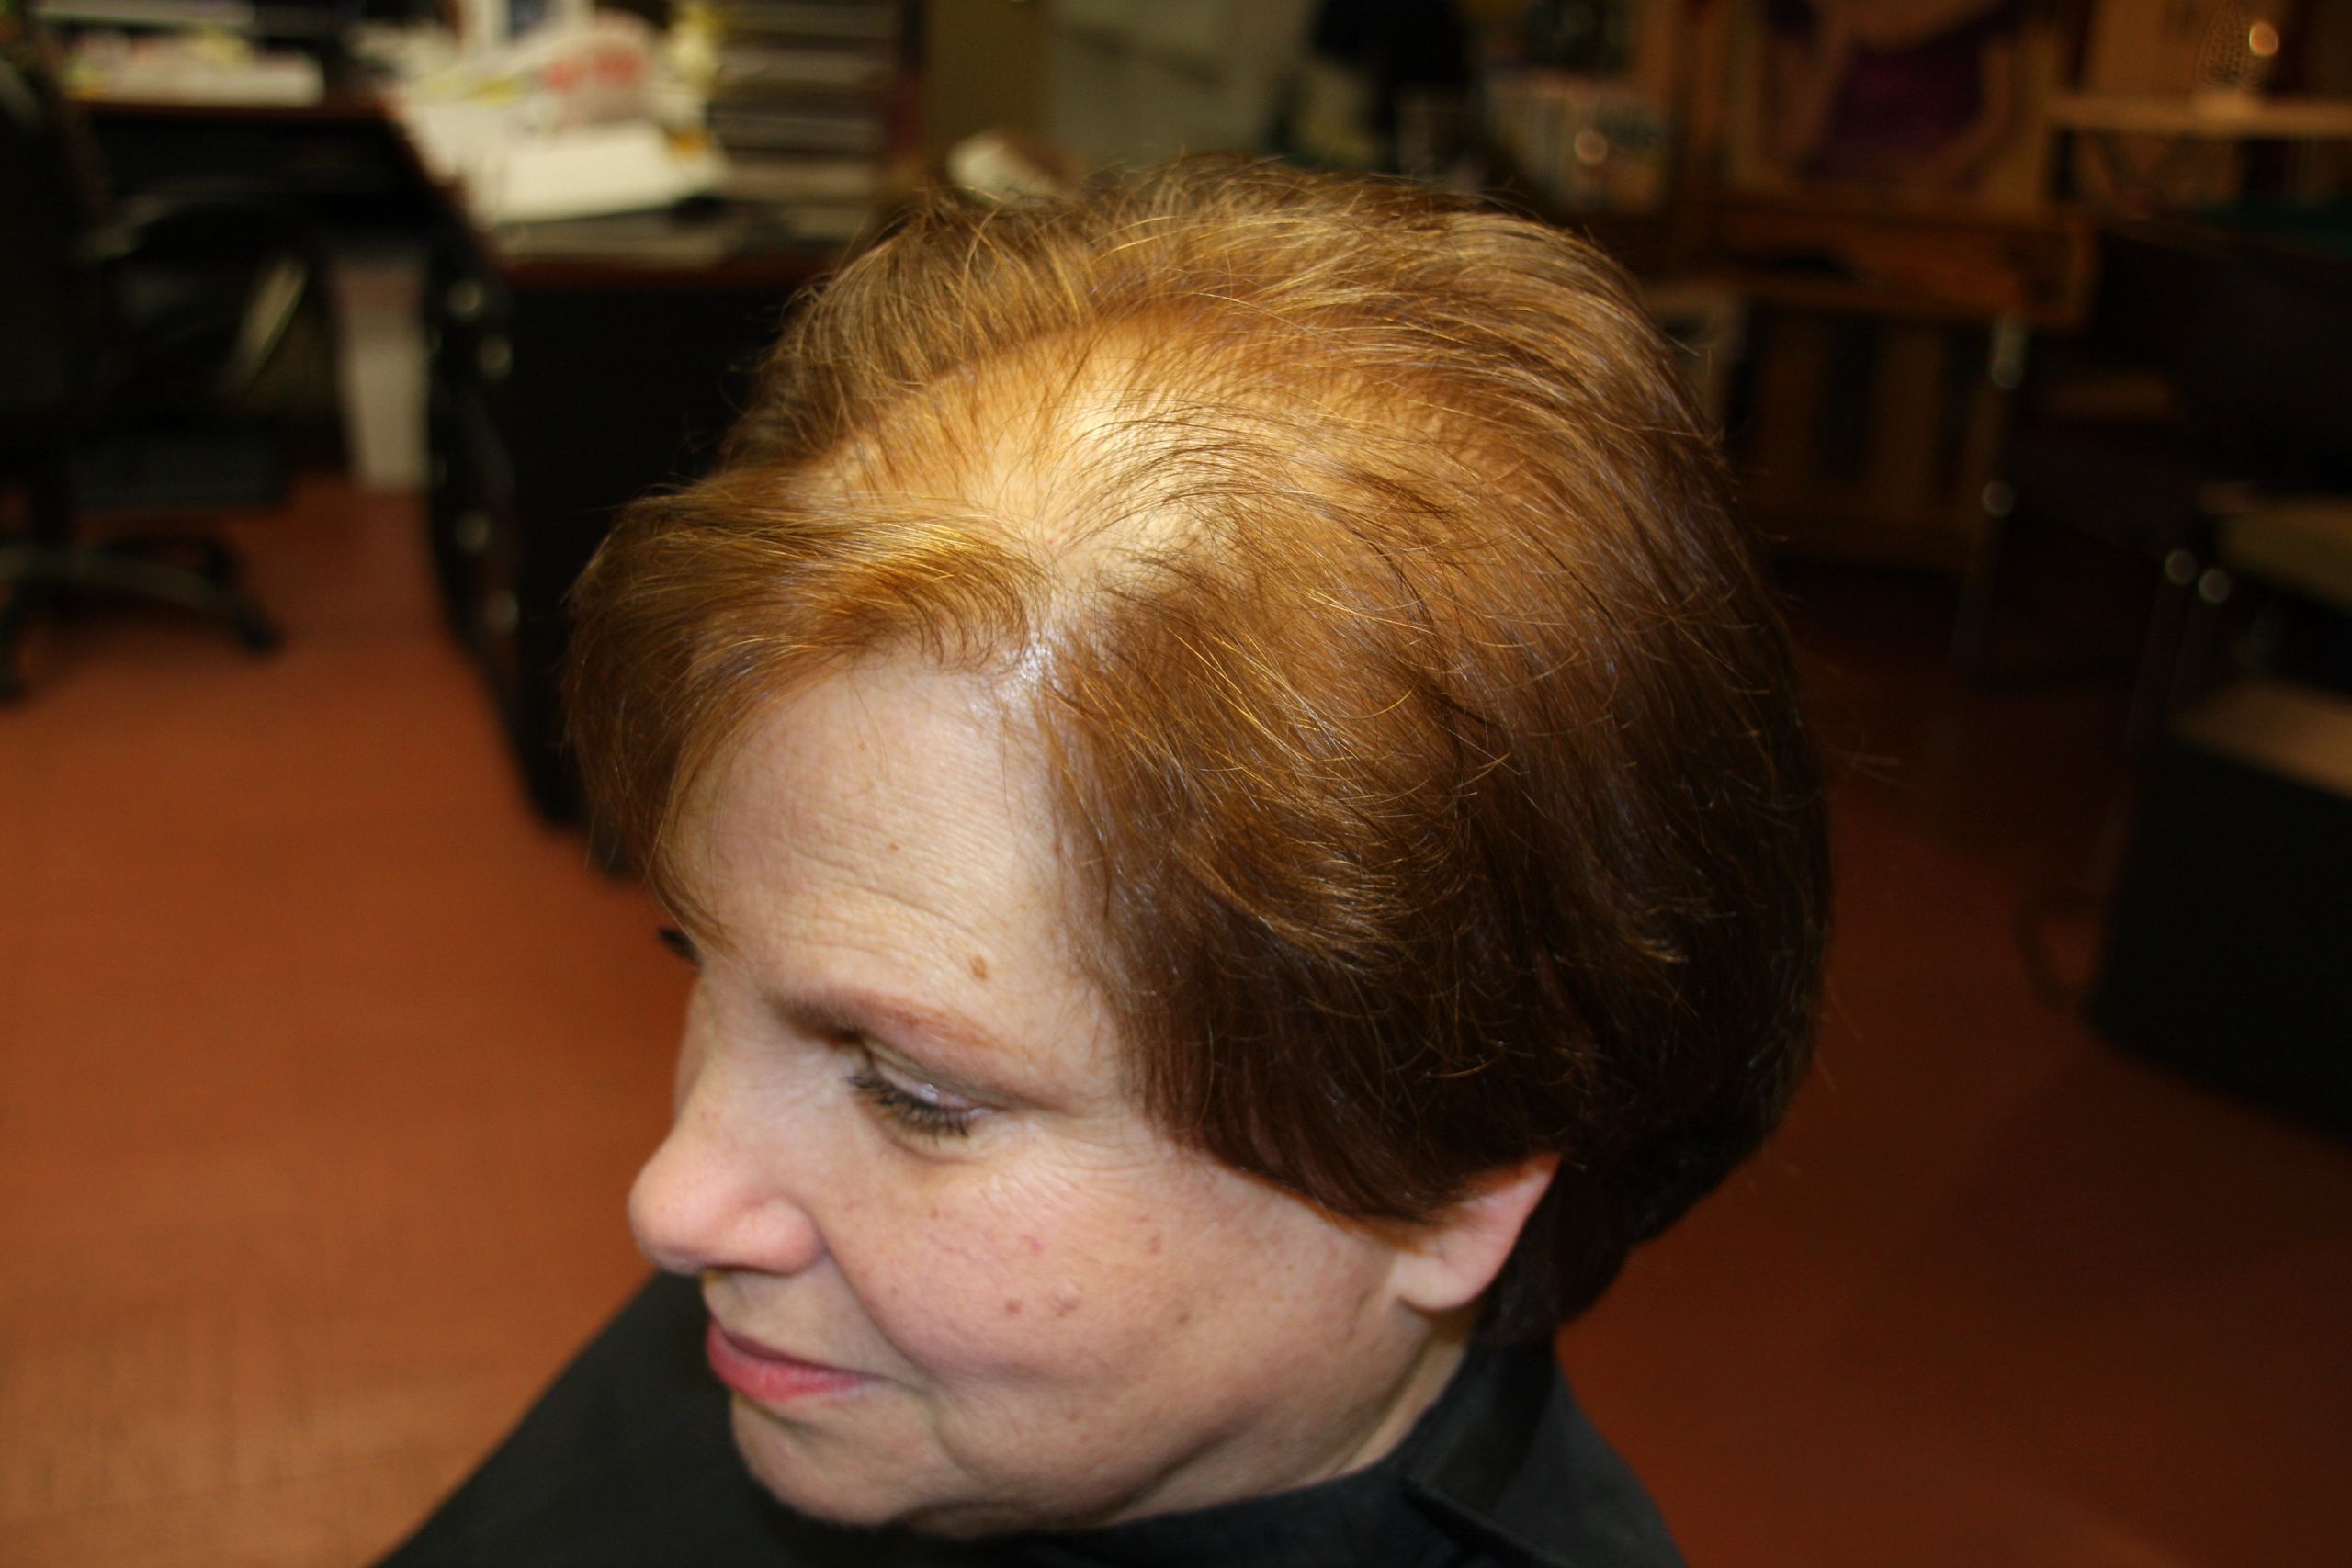 Hairstyles For Female Hair Loss
 Hair Replacement Alopecia Hair Loss Treatments Baldness